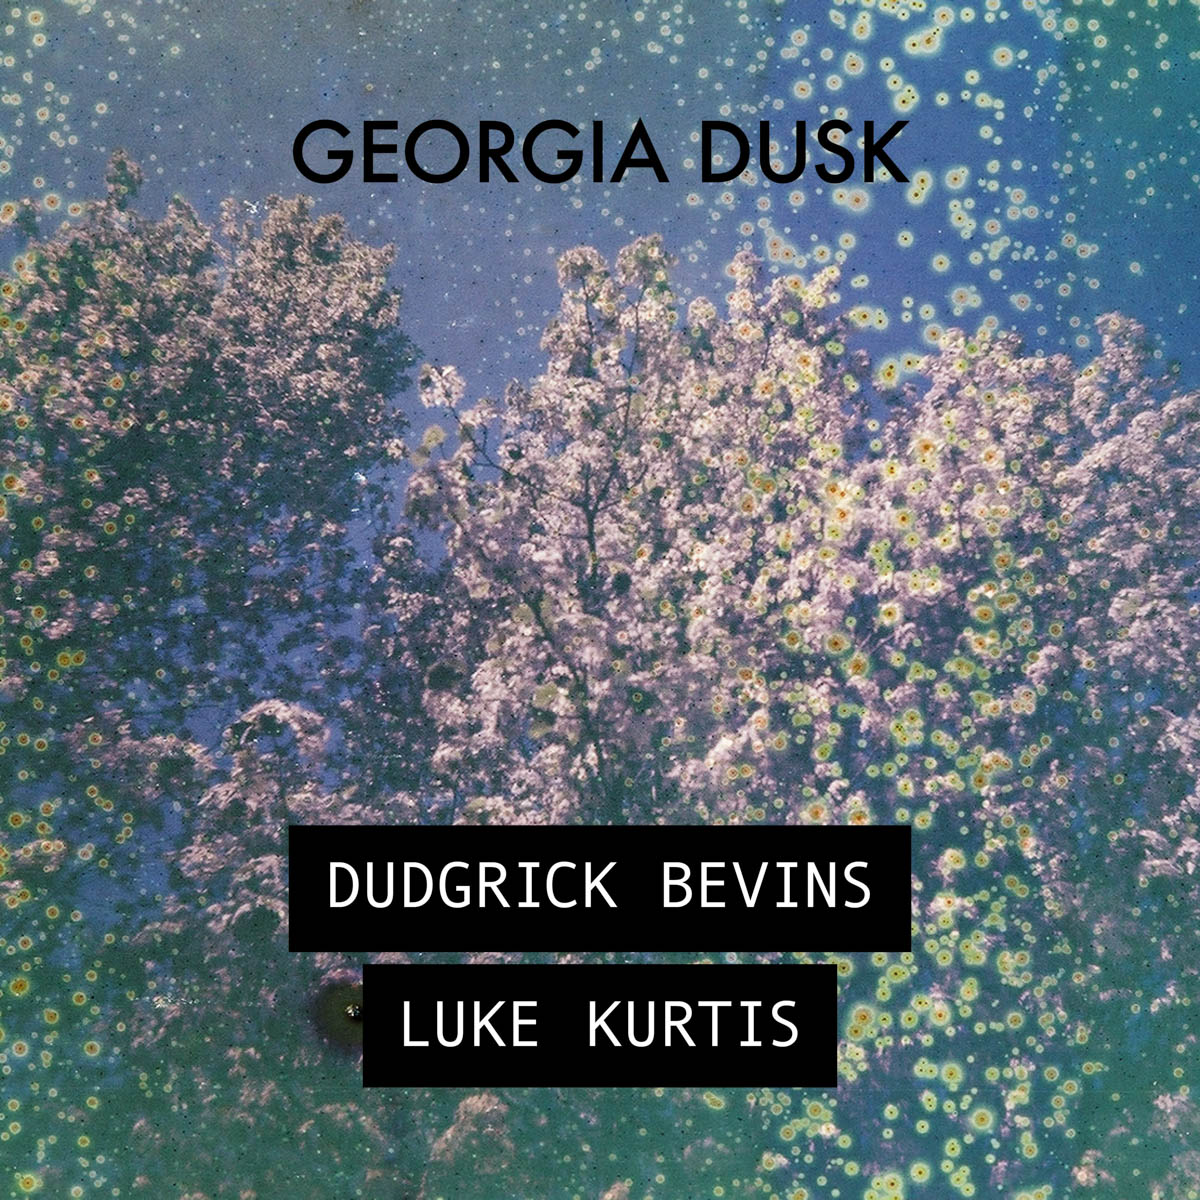 cover of "Georgia Dusk" EP by Dugrick Bevins and luke kurtis featuring an abstract photo that evokes the southern Appalachain landscape of the two artists